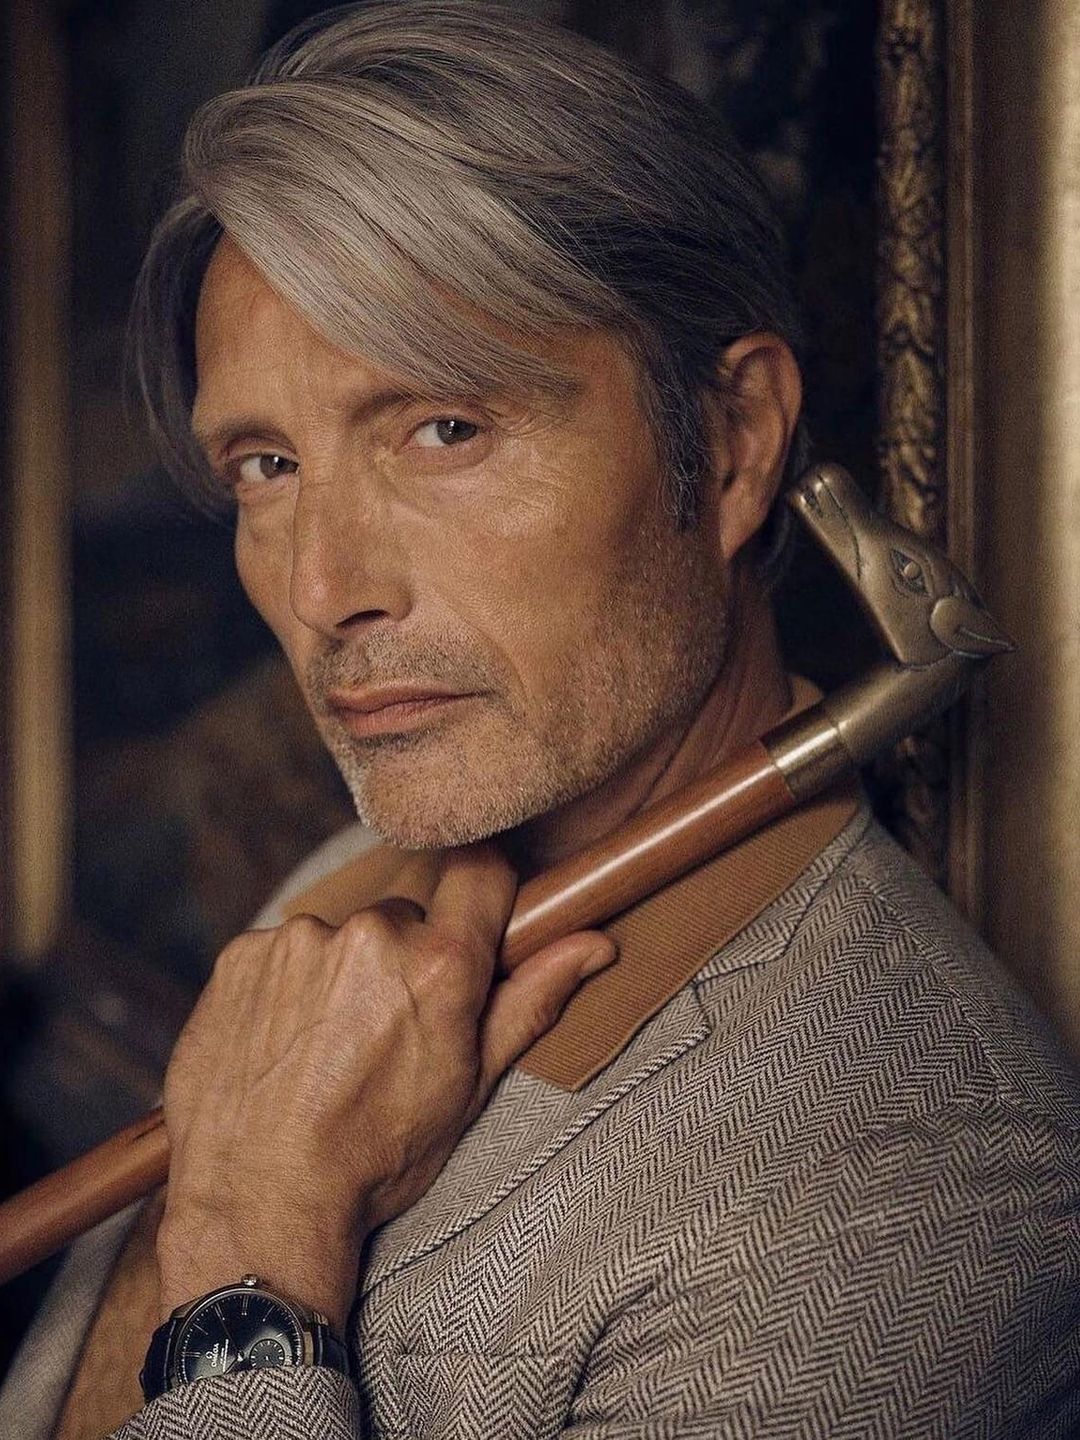 Mads Mikkelsen who is his father